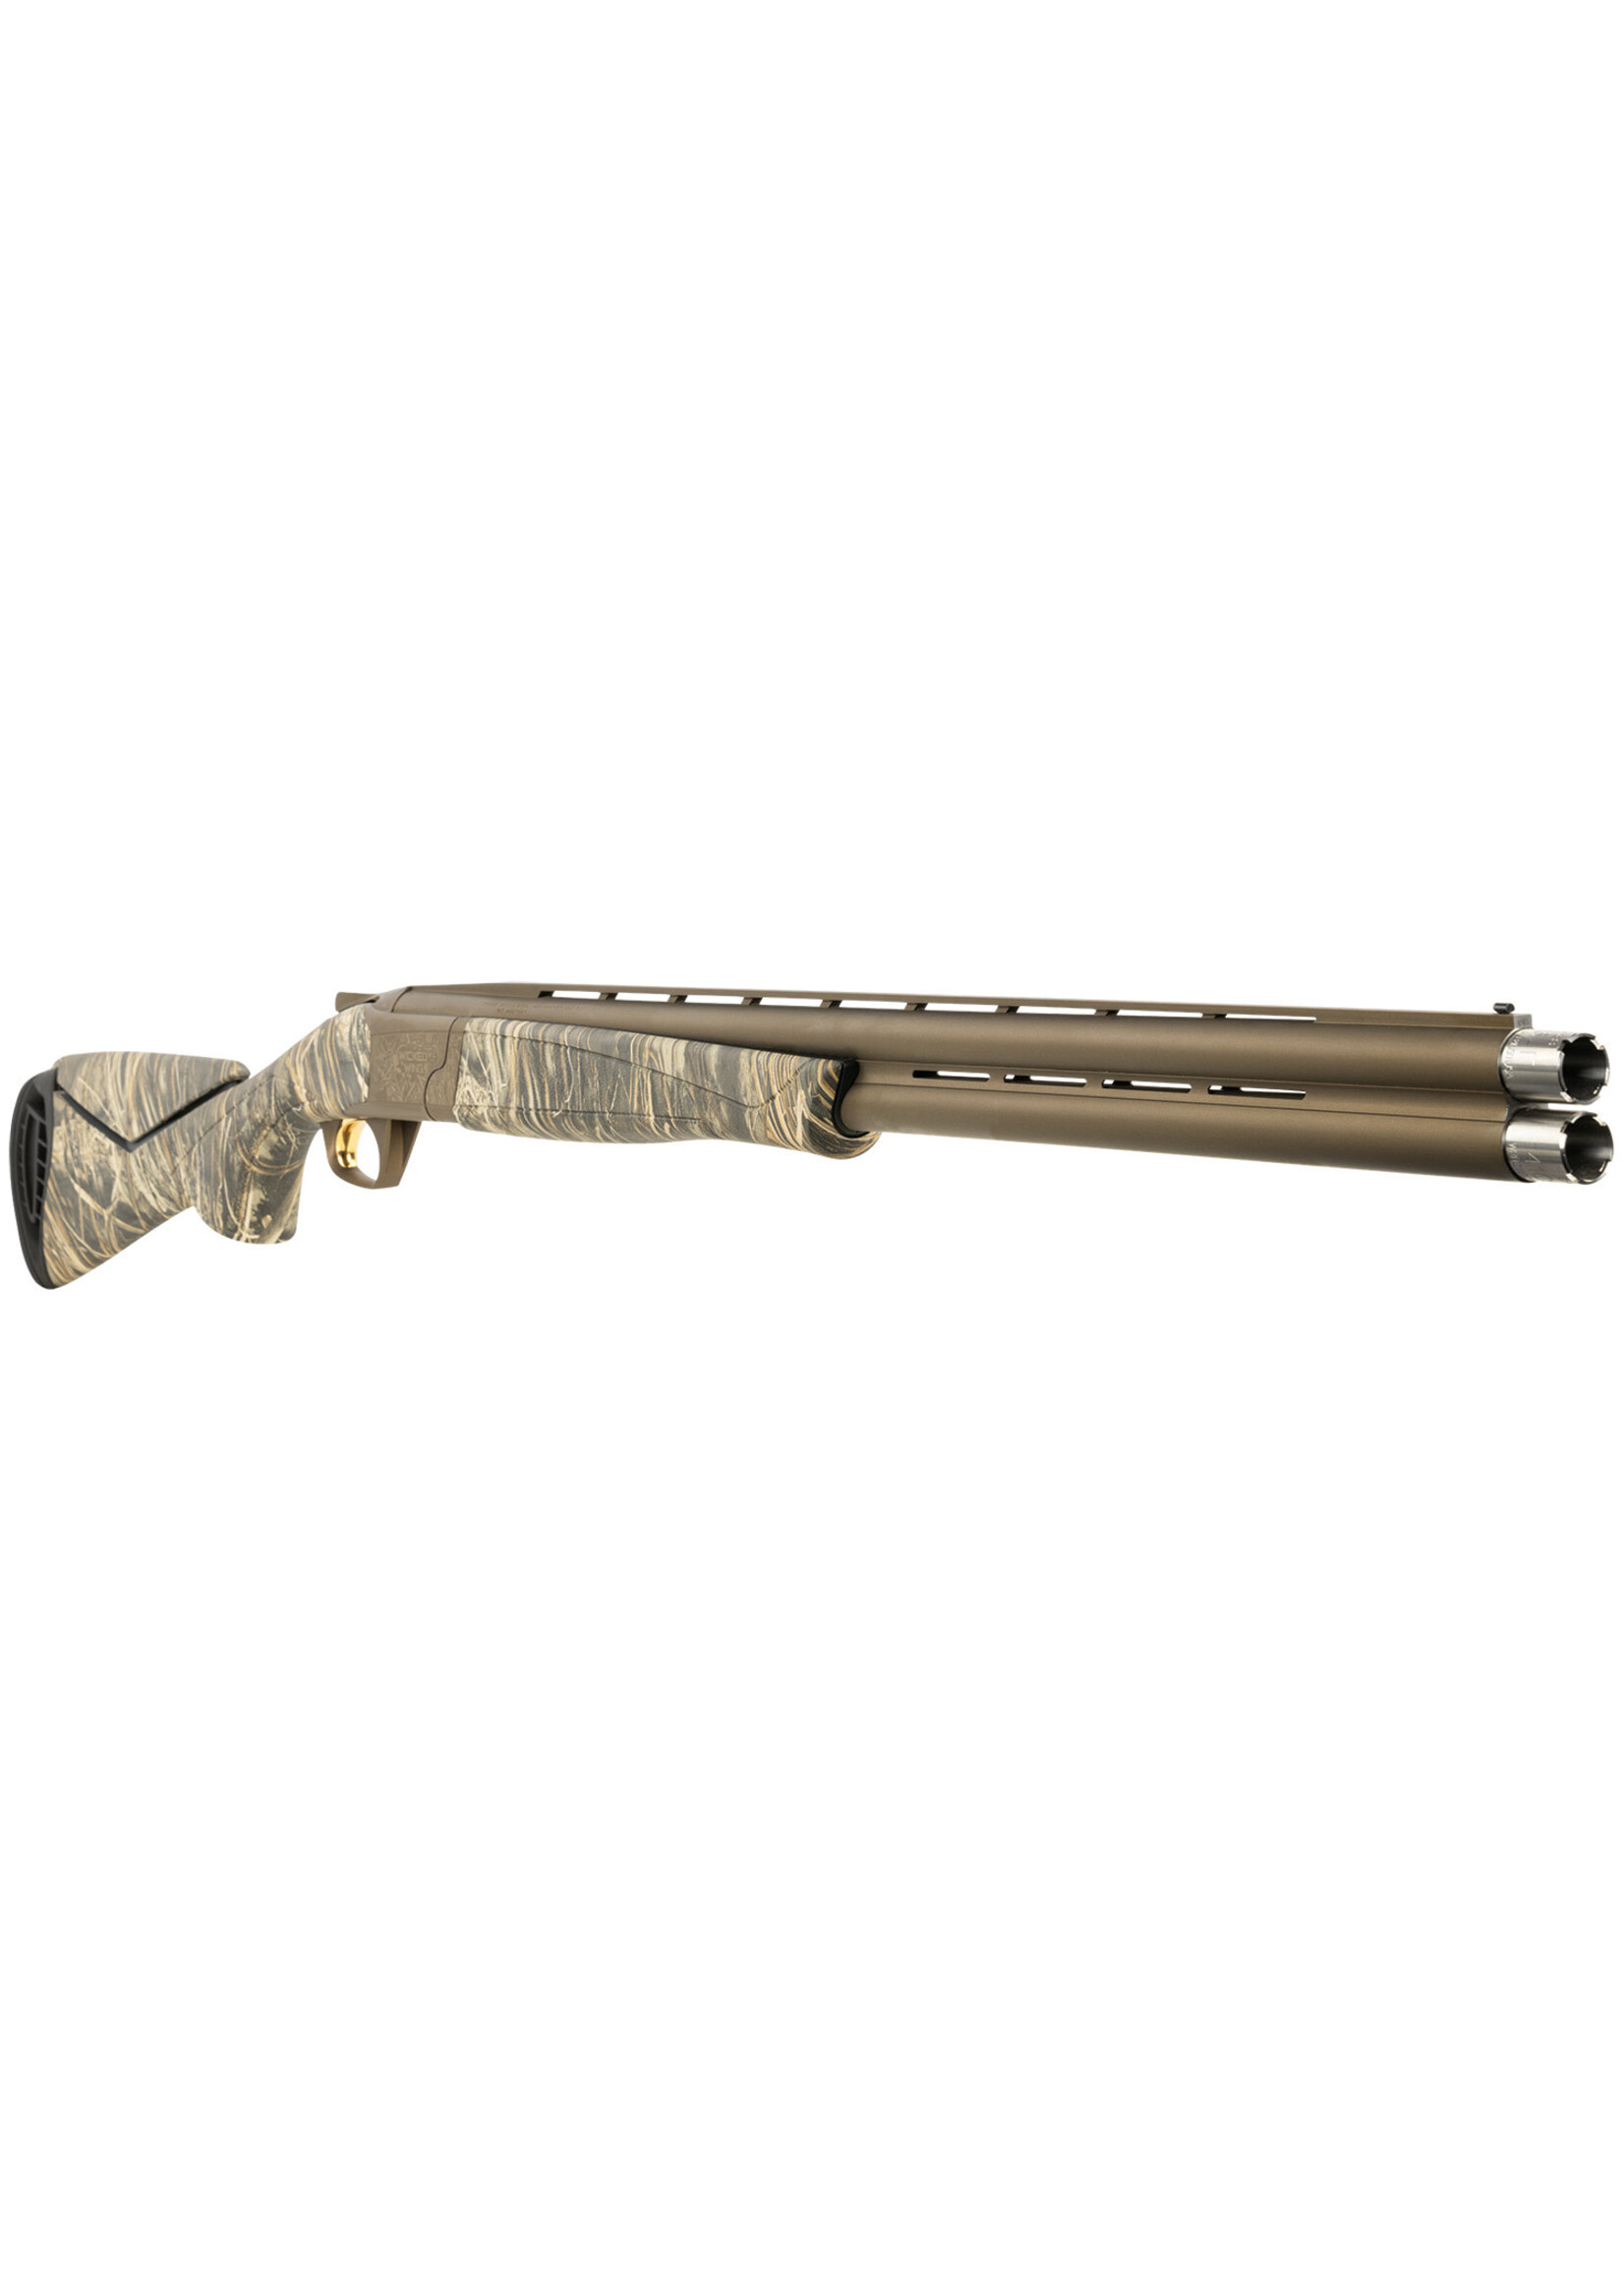 Browning Browning 018729205 Cynergy Wicked Wing 12 Gauge 26" Barrel 3.5" 2rd, Burnt Bronze Cerakote Barrel/Camo Design Receiver, Realtree Max-7 Synthetic Stock With Adjustable Comb & Textured Gripping Surface